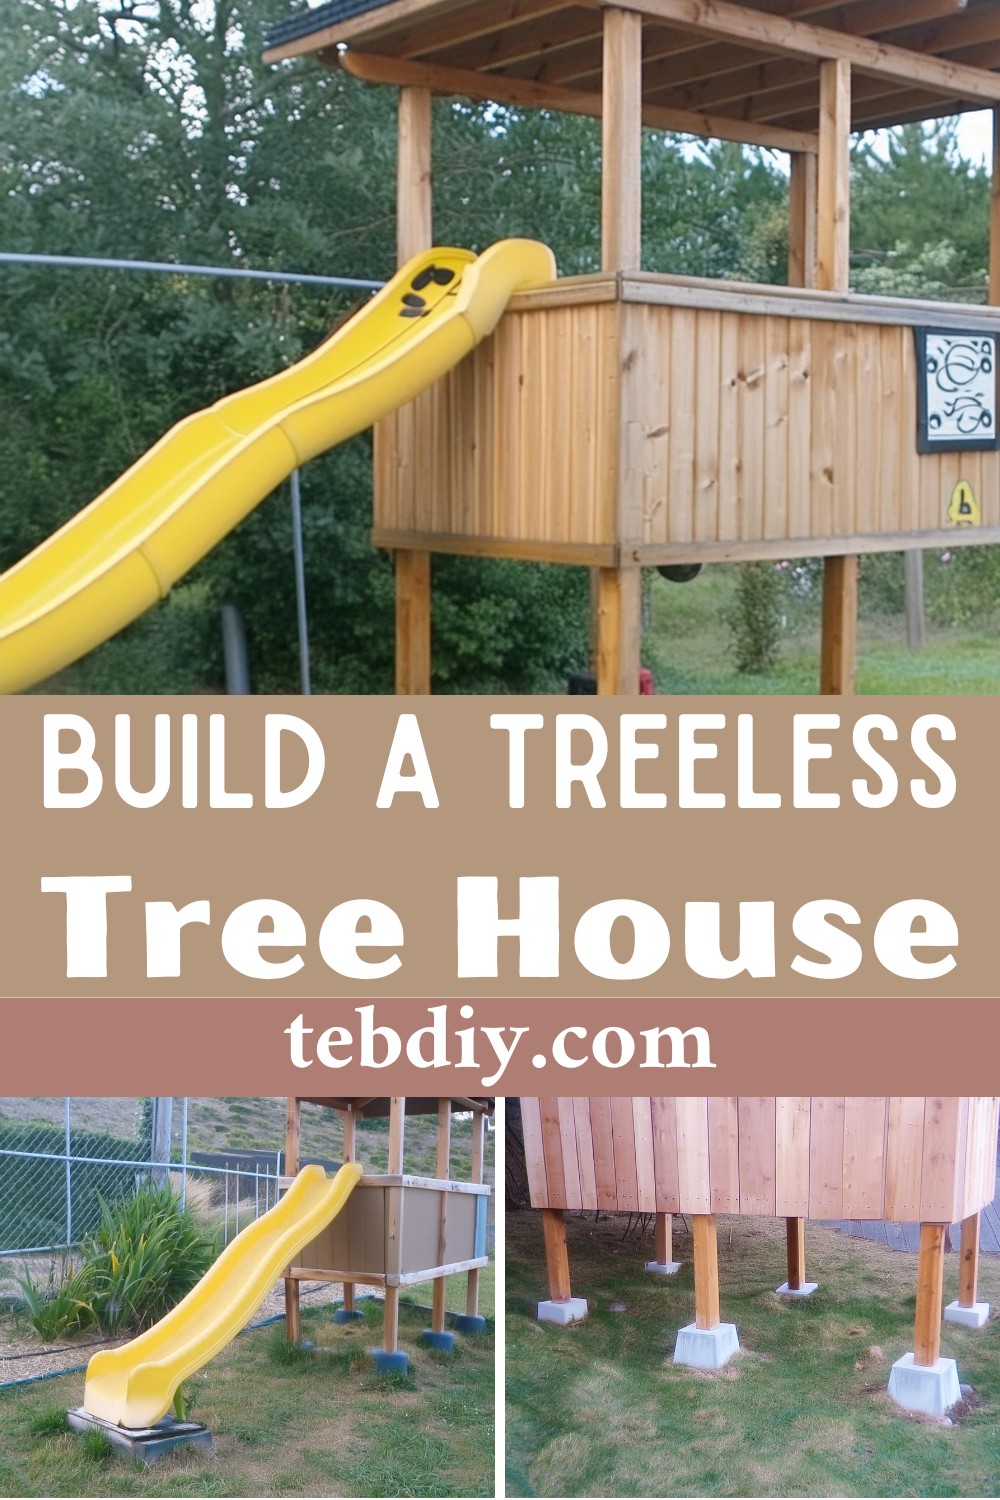 How To Build A Treeless Tree House With Slide For Kids